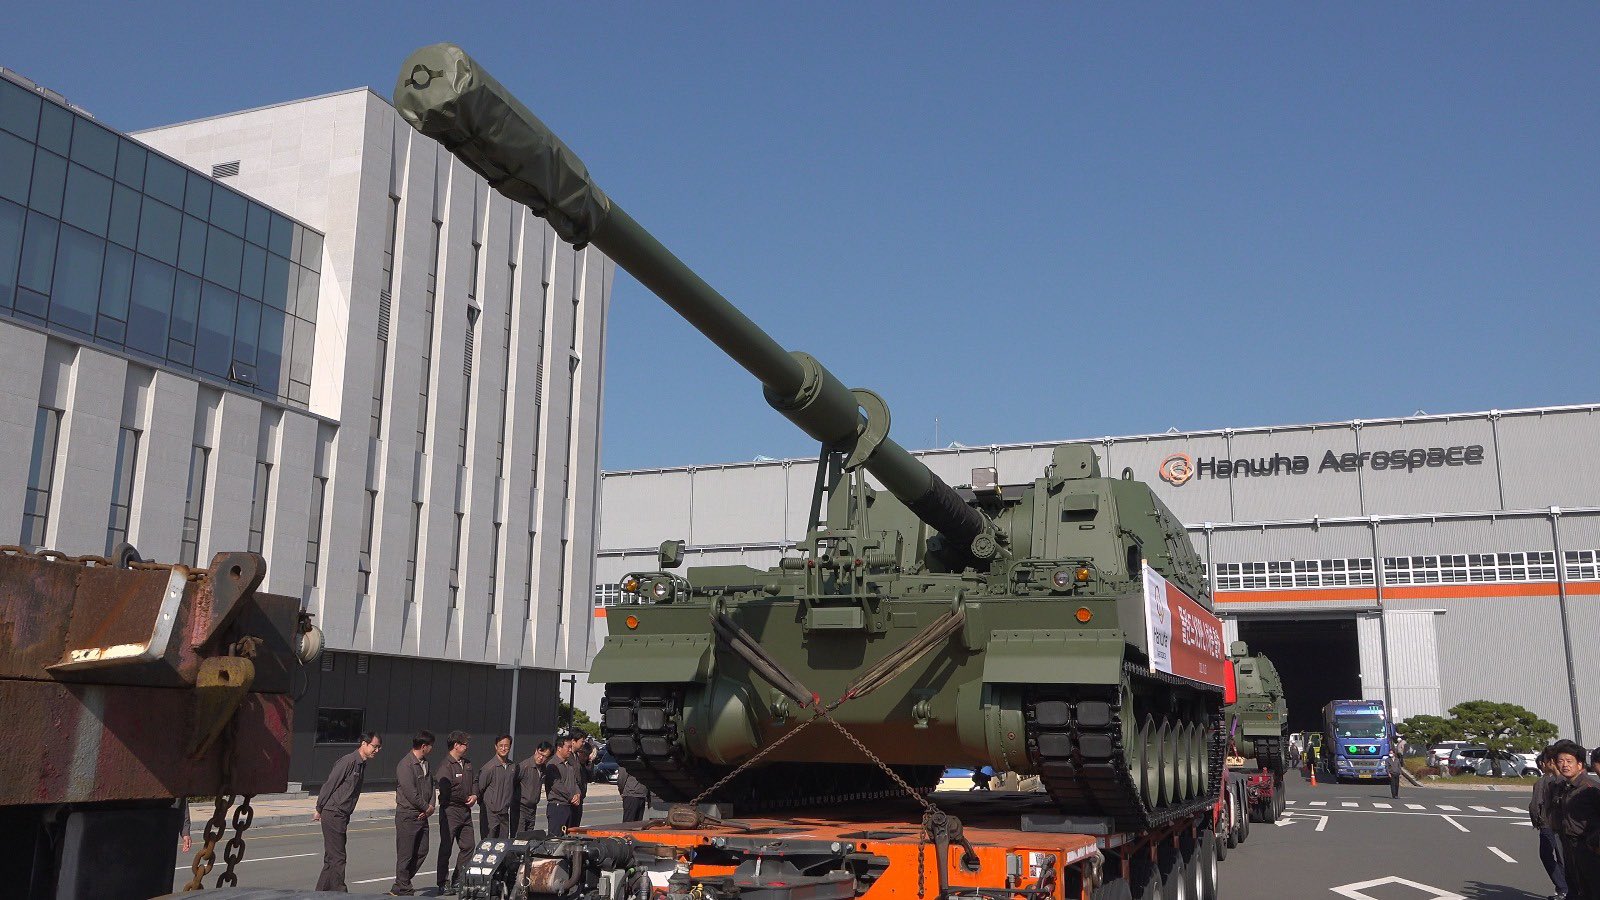 Hanwha has shipped another batch of K9A1 Thunder self-propelled howitzers to Poland under a multi-billion dollar contract